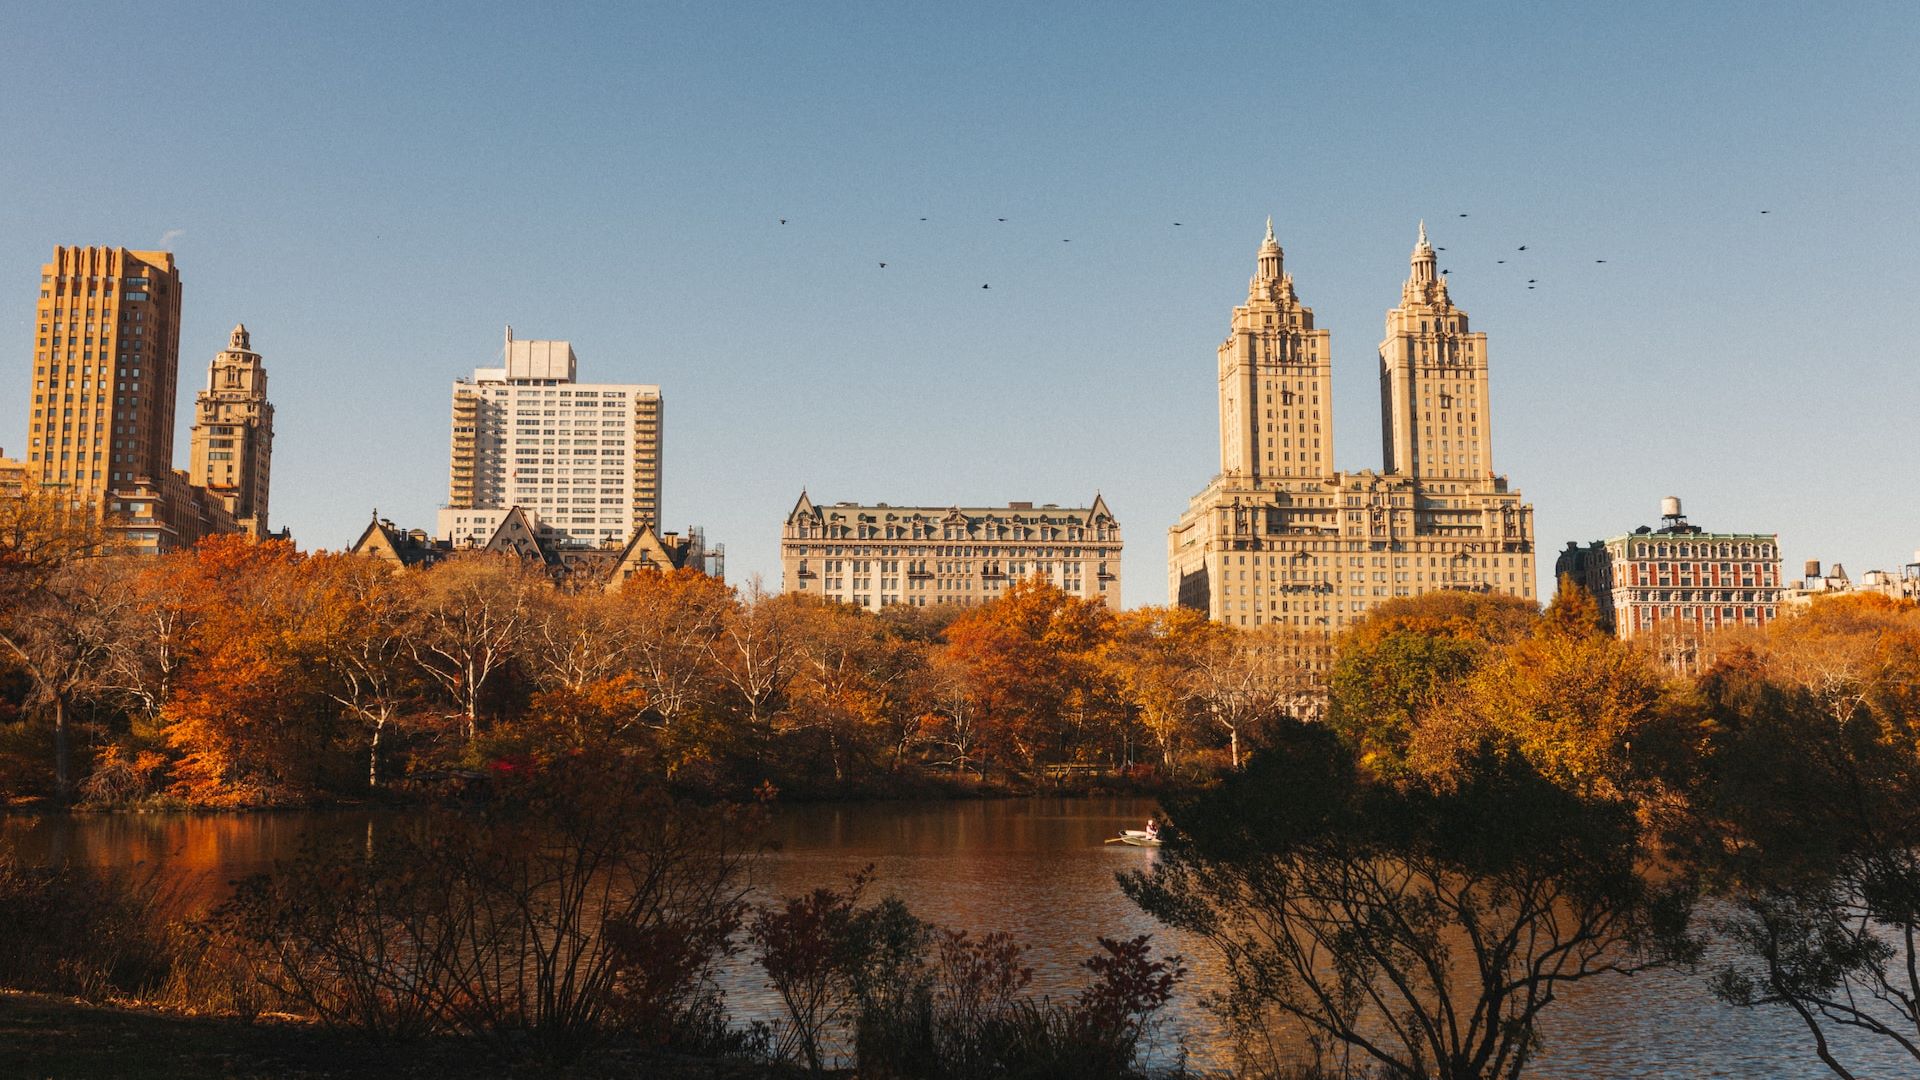 A lake in Central Park, surrounded by Autumn foliage with the city skyline in the distance.